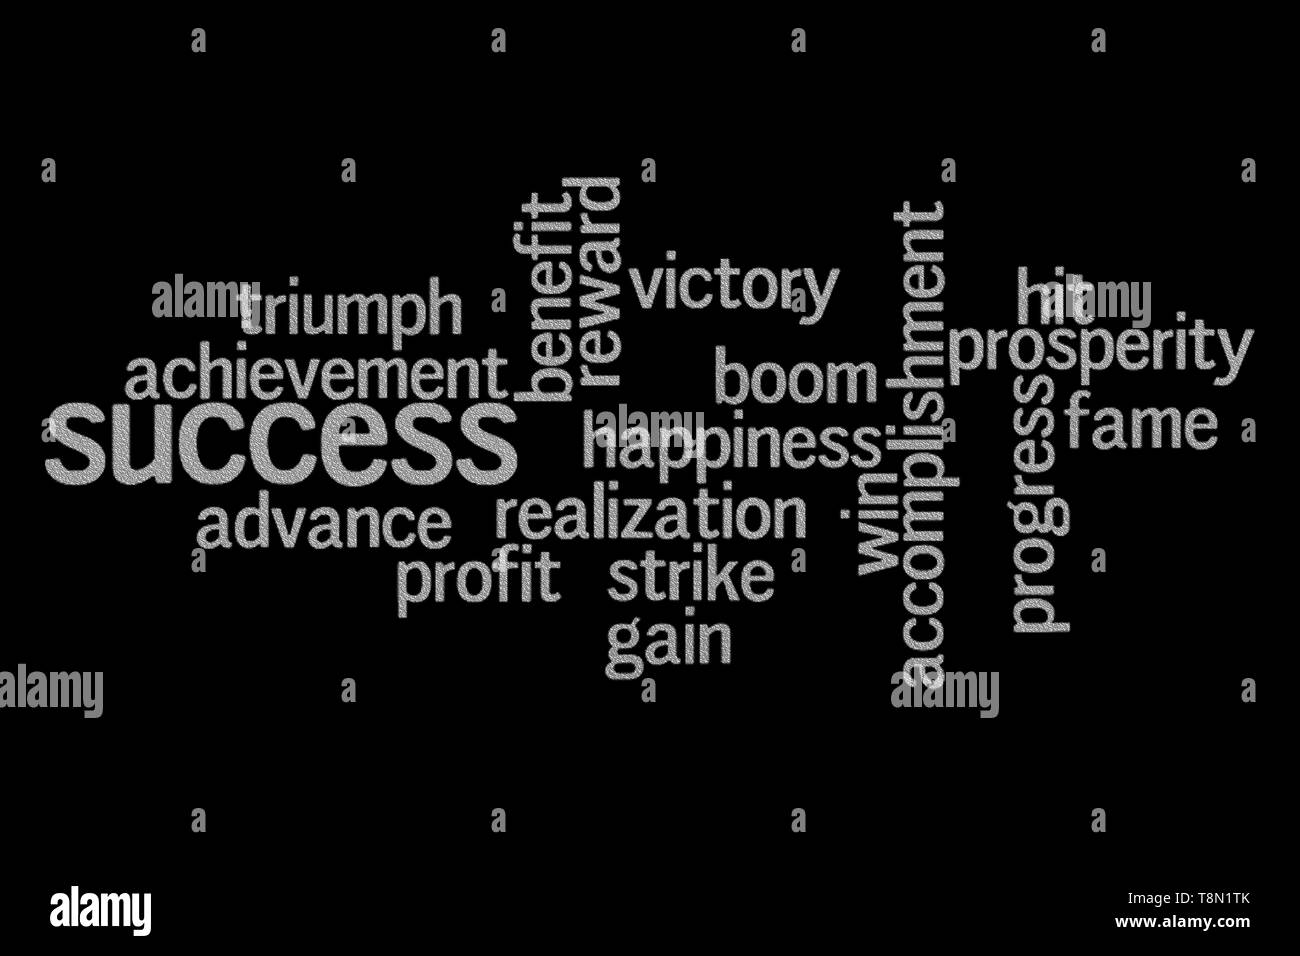 Success word cloud. Business and motivation concept Stock Photo